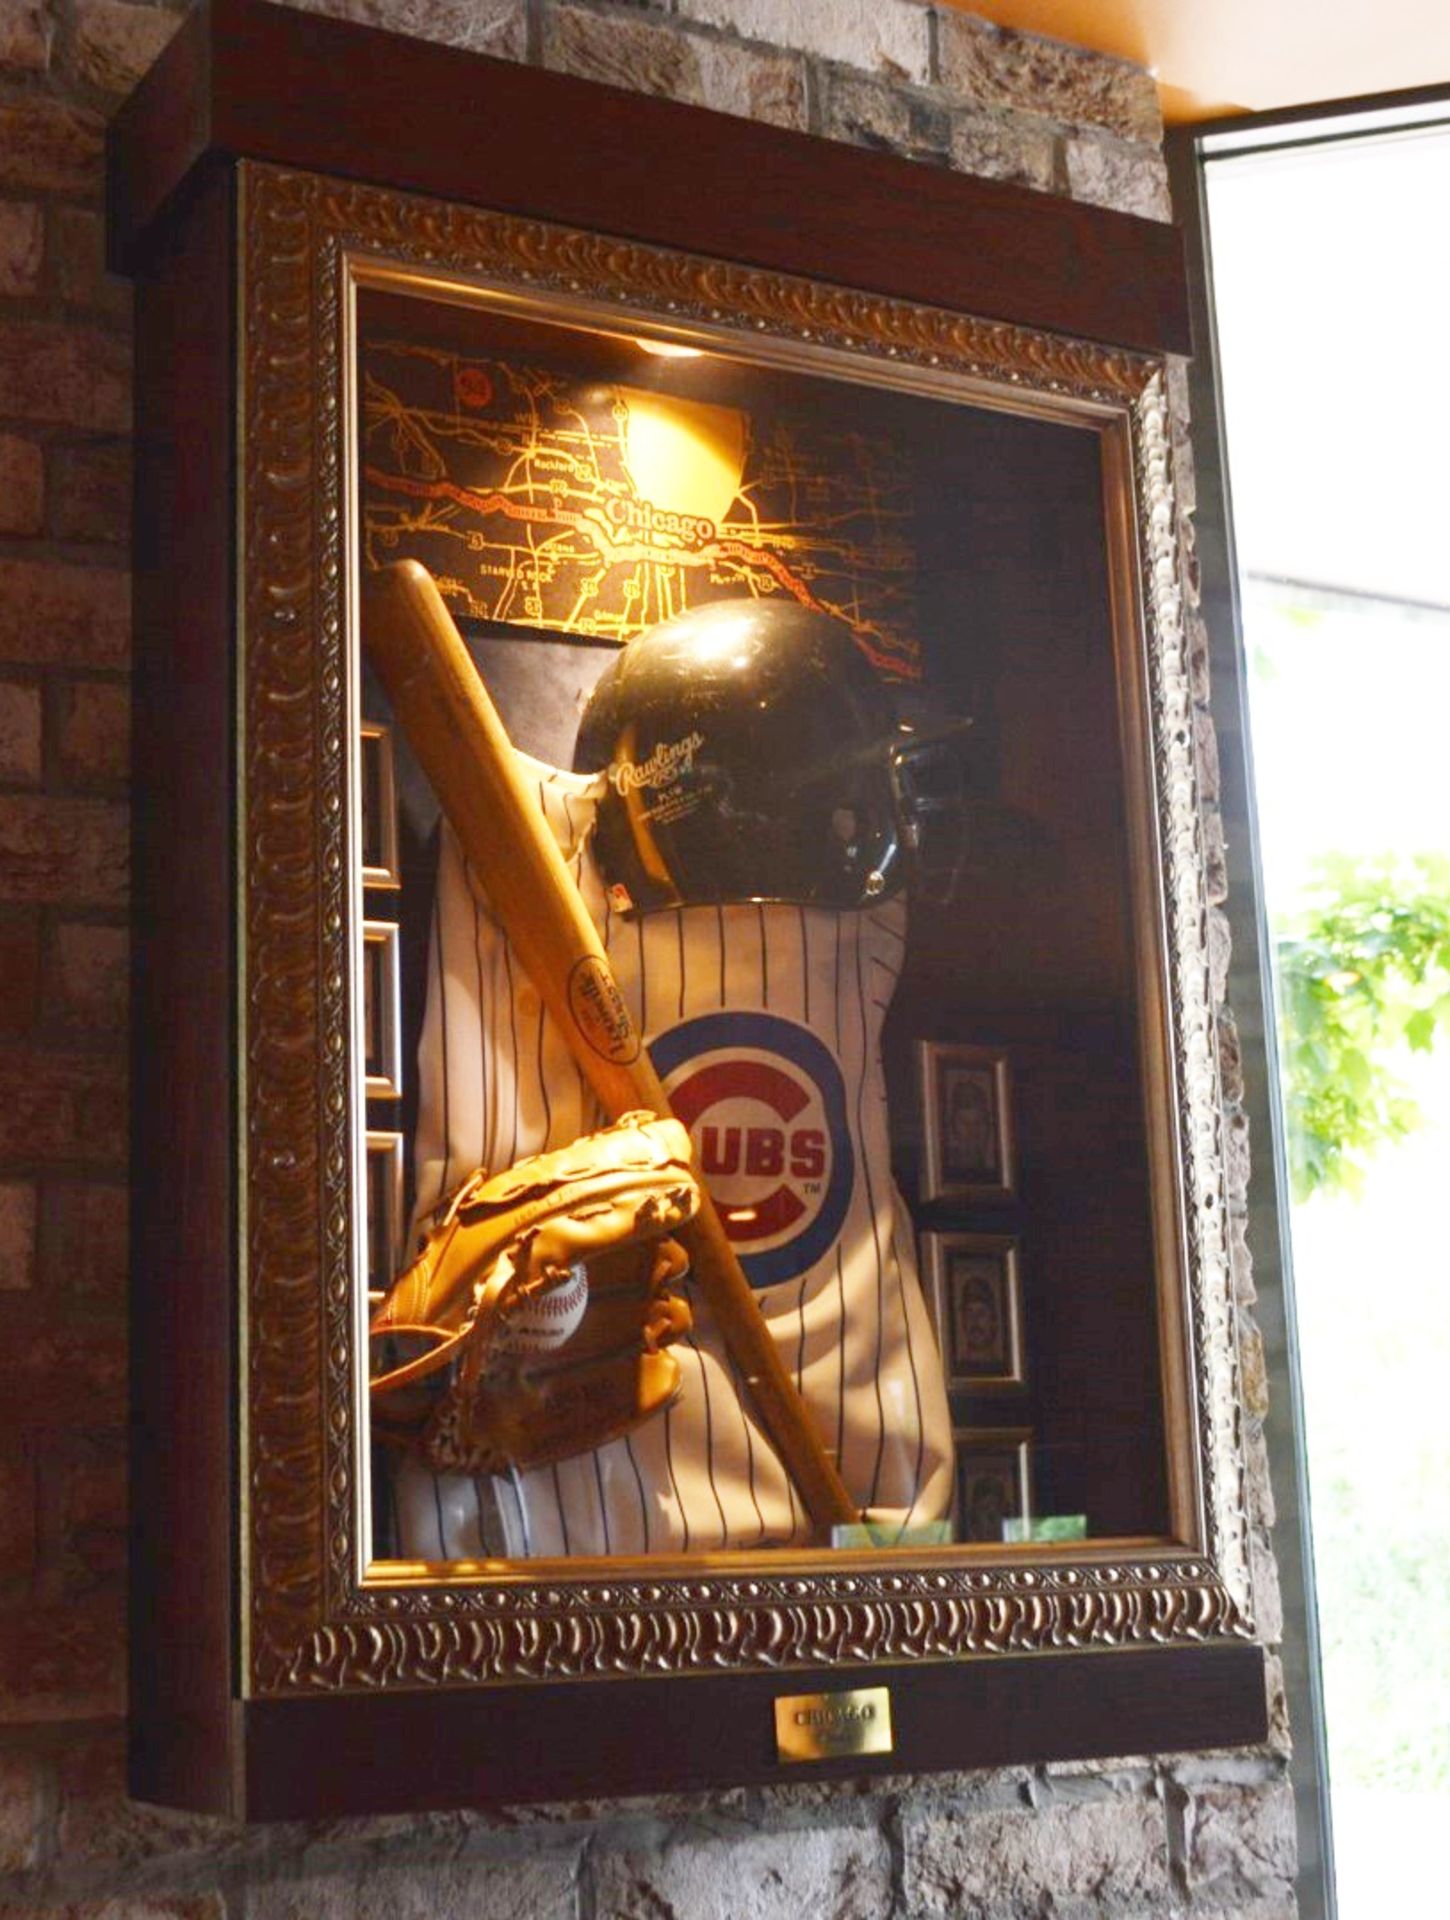 1 x Americana Wall Mounted Illuminated Display Case - CHICAGO CUBS BASEBALL - Includes Various - Image 4 of 7